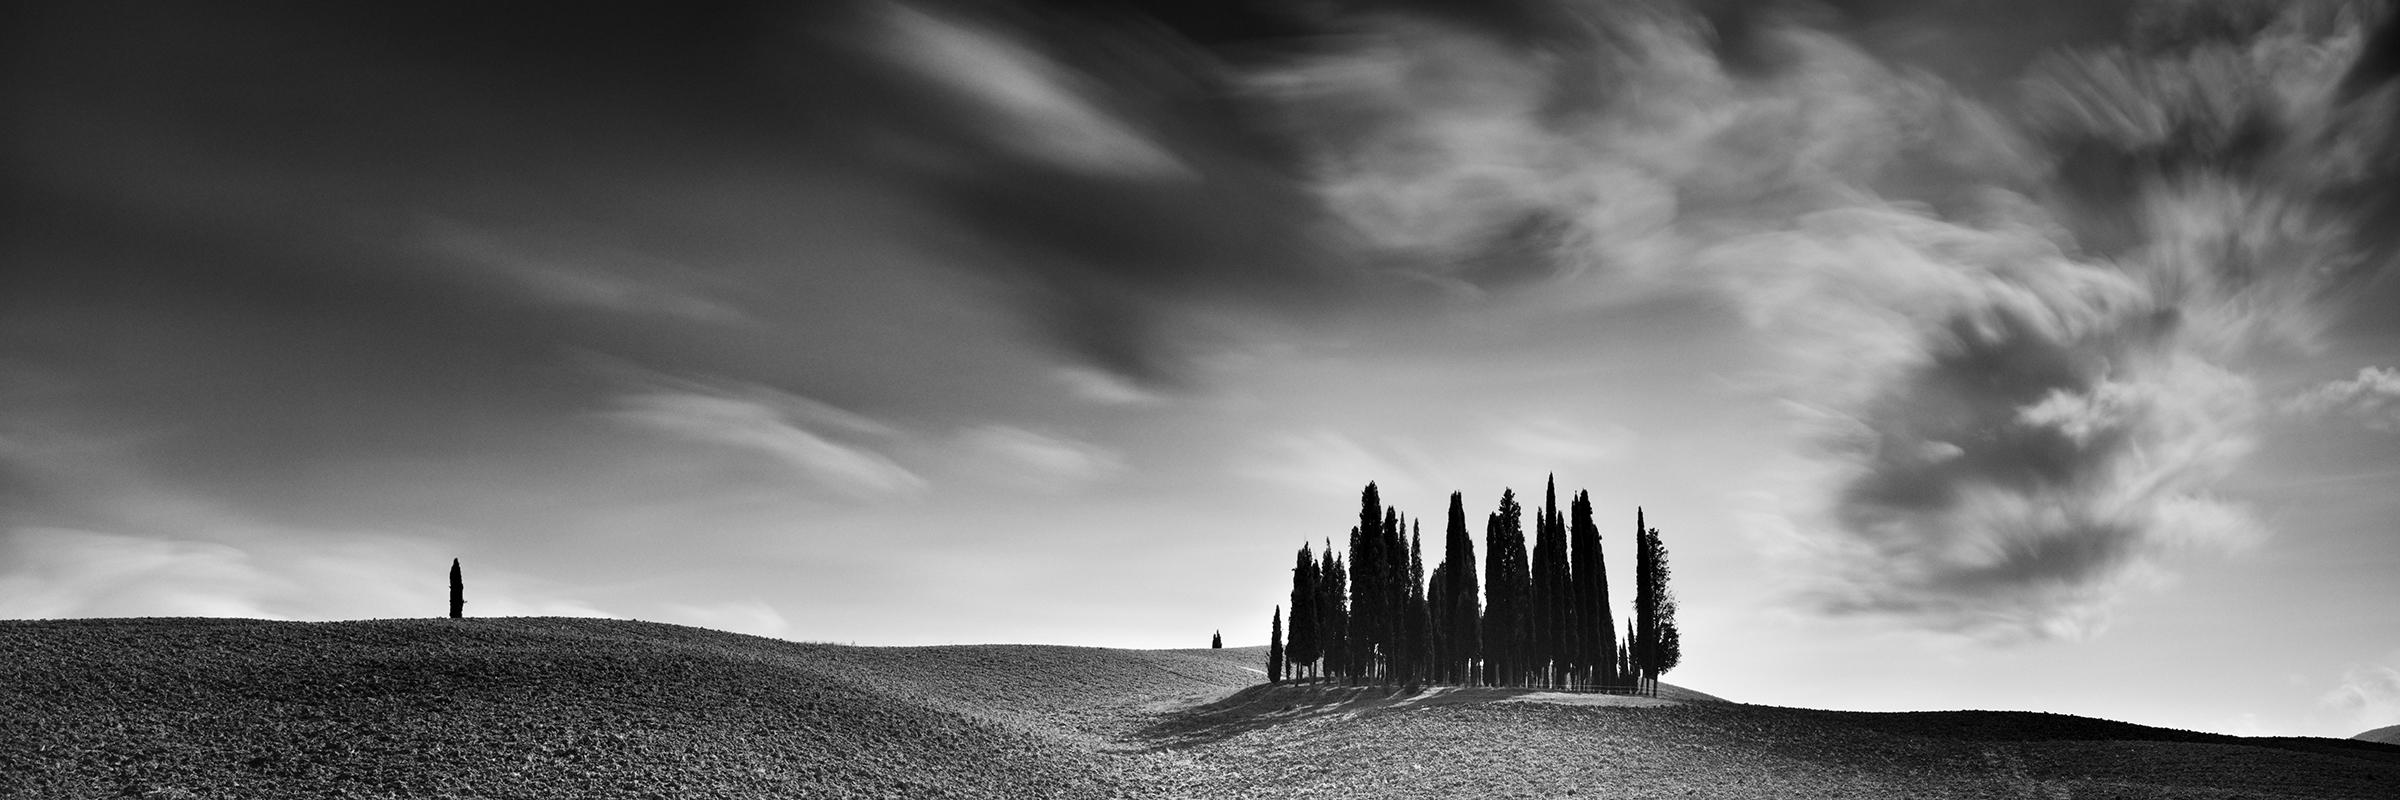 Gerald Berghammer Black and White Photograph - Cypress Hill Panorama, Tuscany, black and white photography, fine art landscape